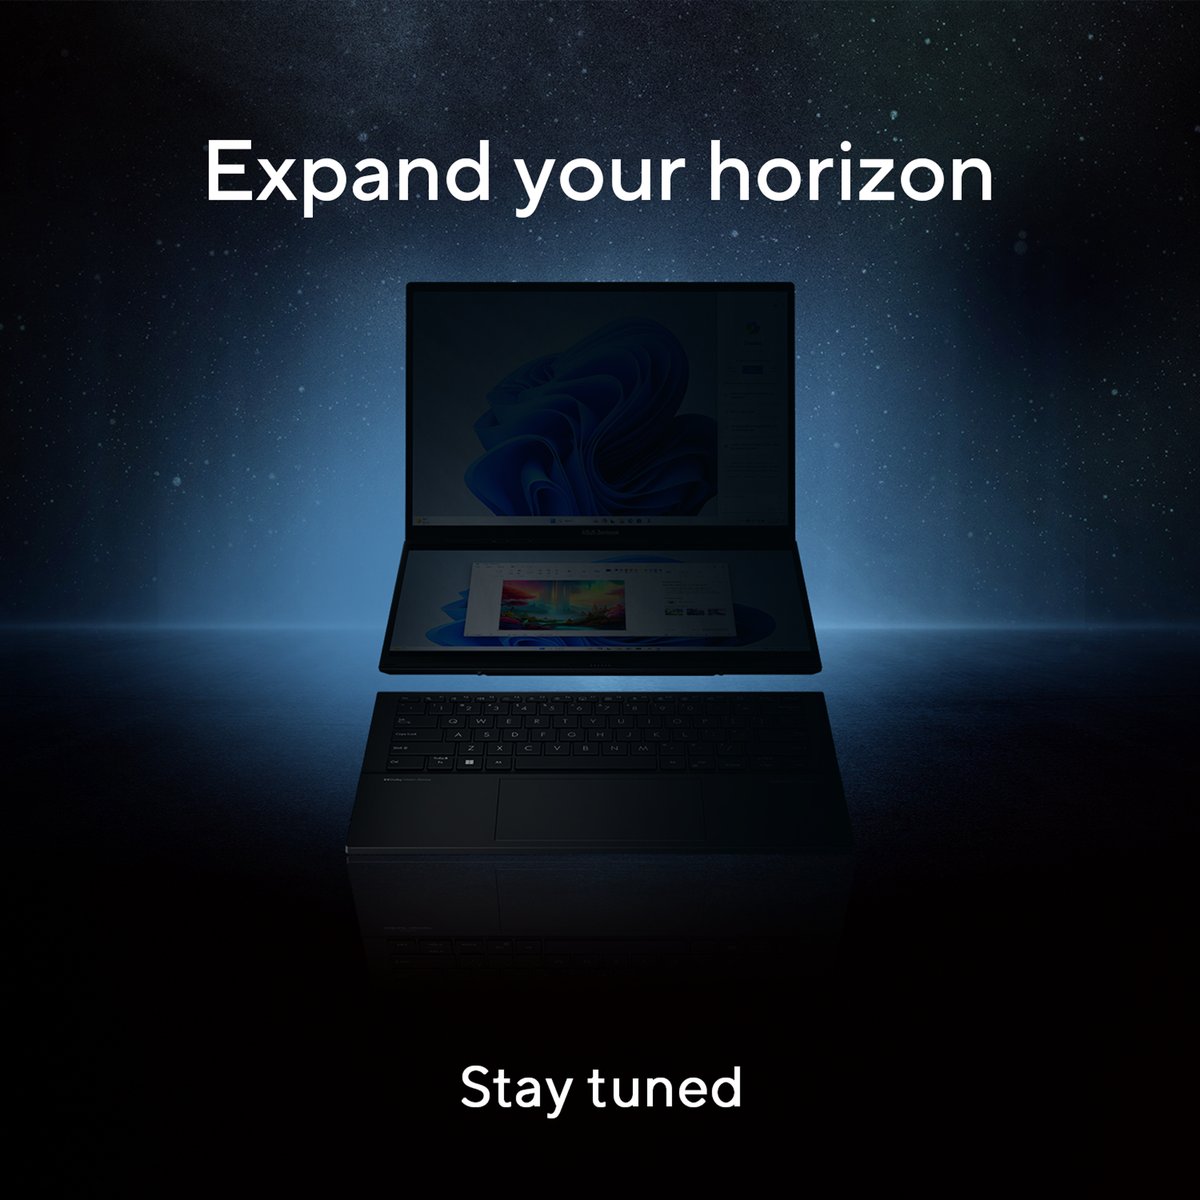 #Asus Zenbook DUO is launching soon in the India, officially Teased by brand.

#LetsDUOIt #ASUSZenbookDUO #AiPoweredPC